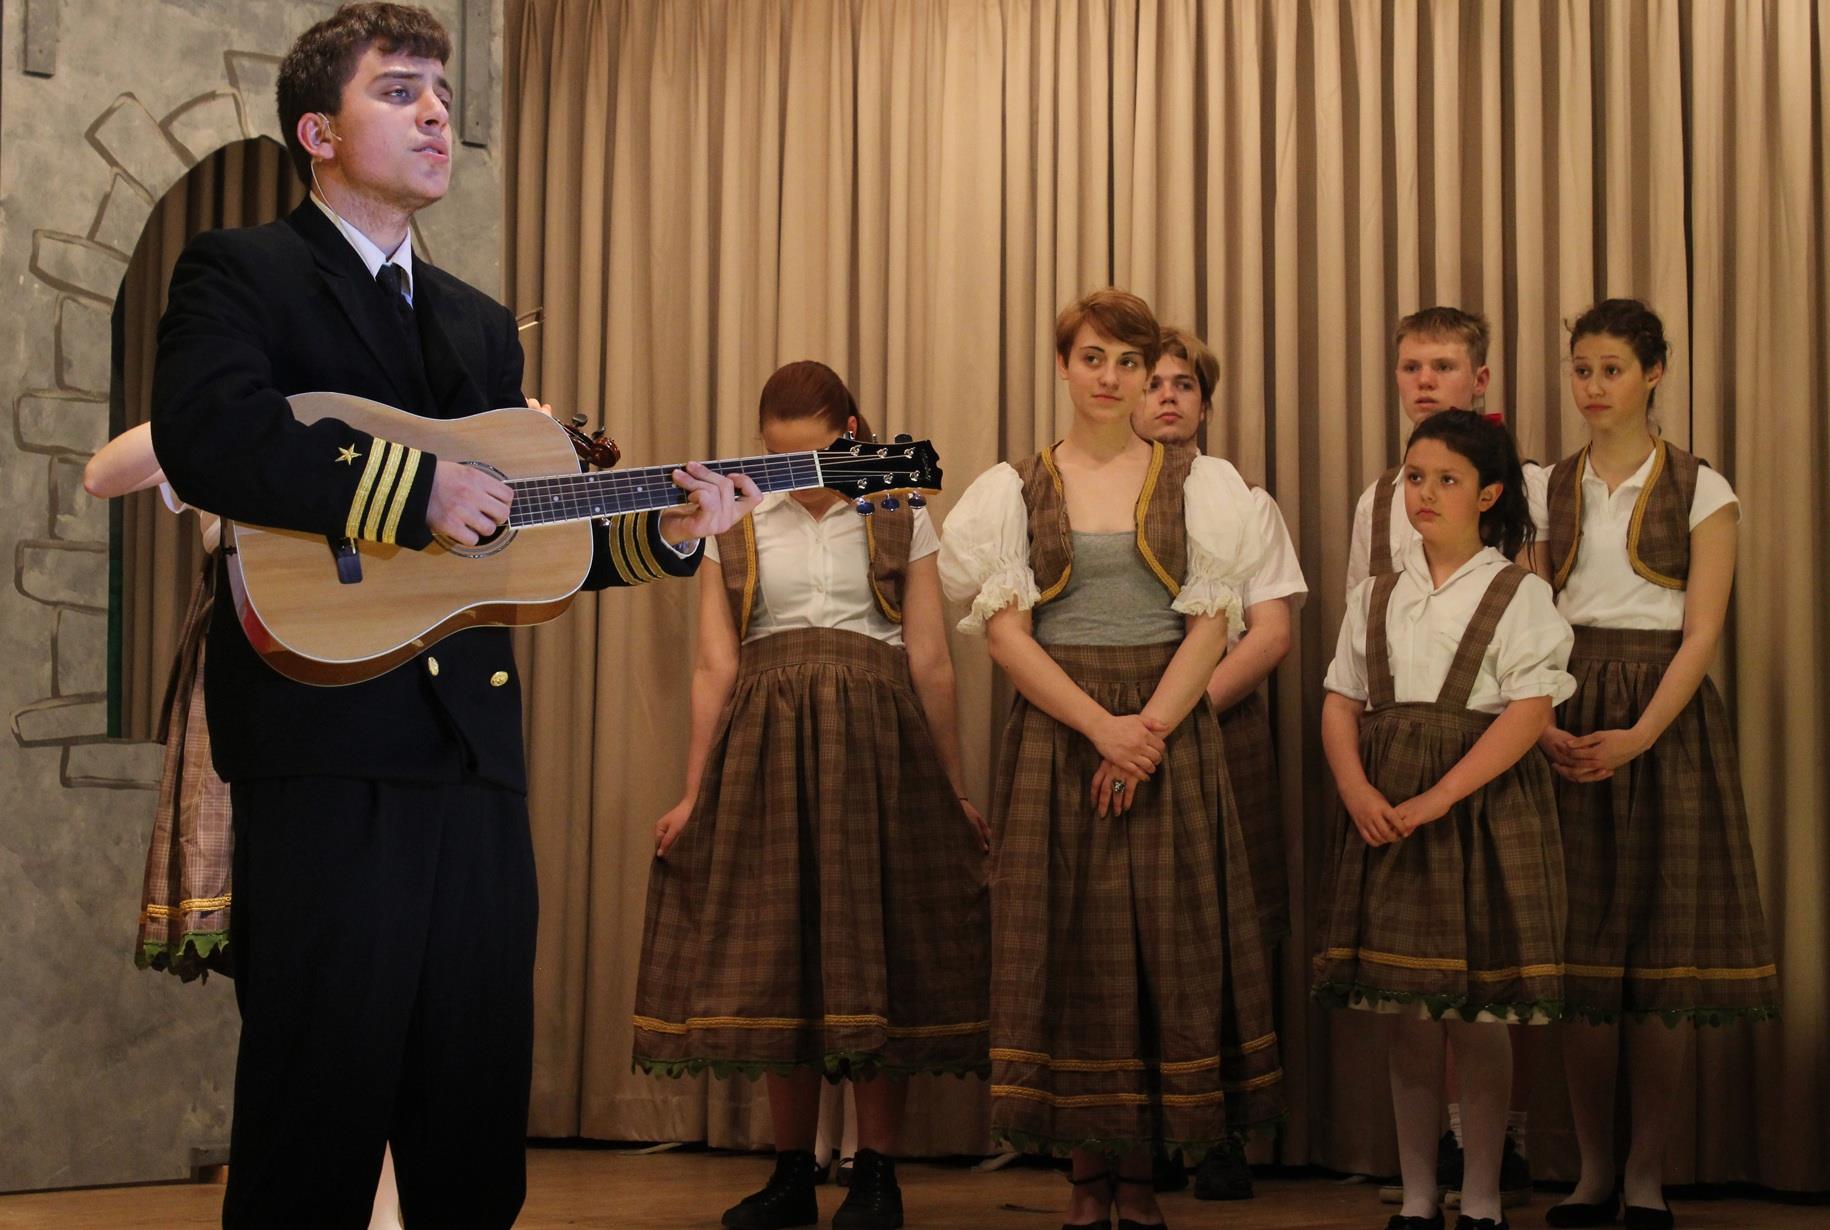 The Singing Family NHA's The Sound of Music